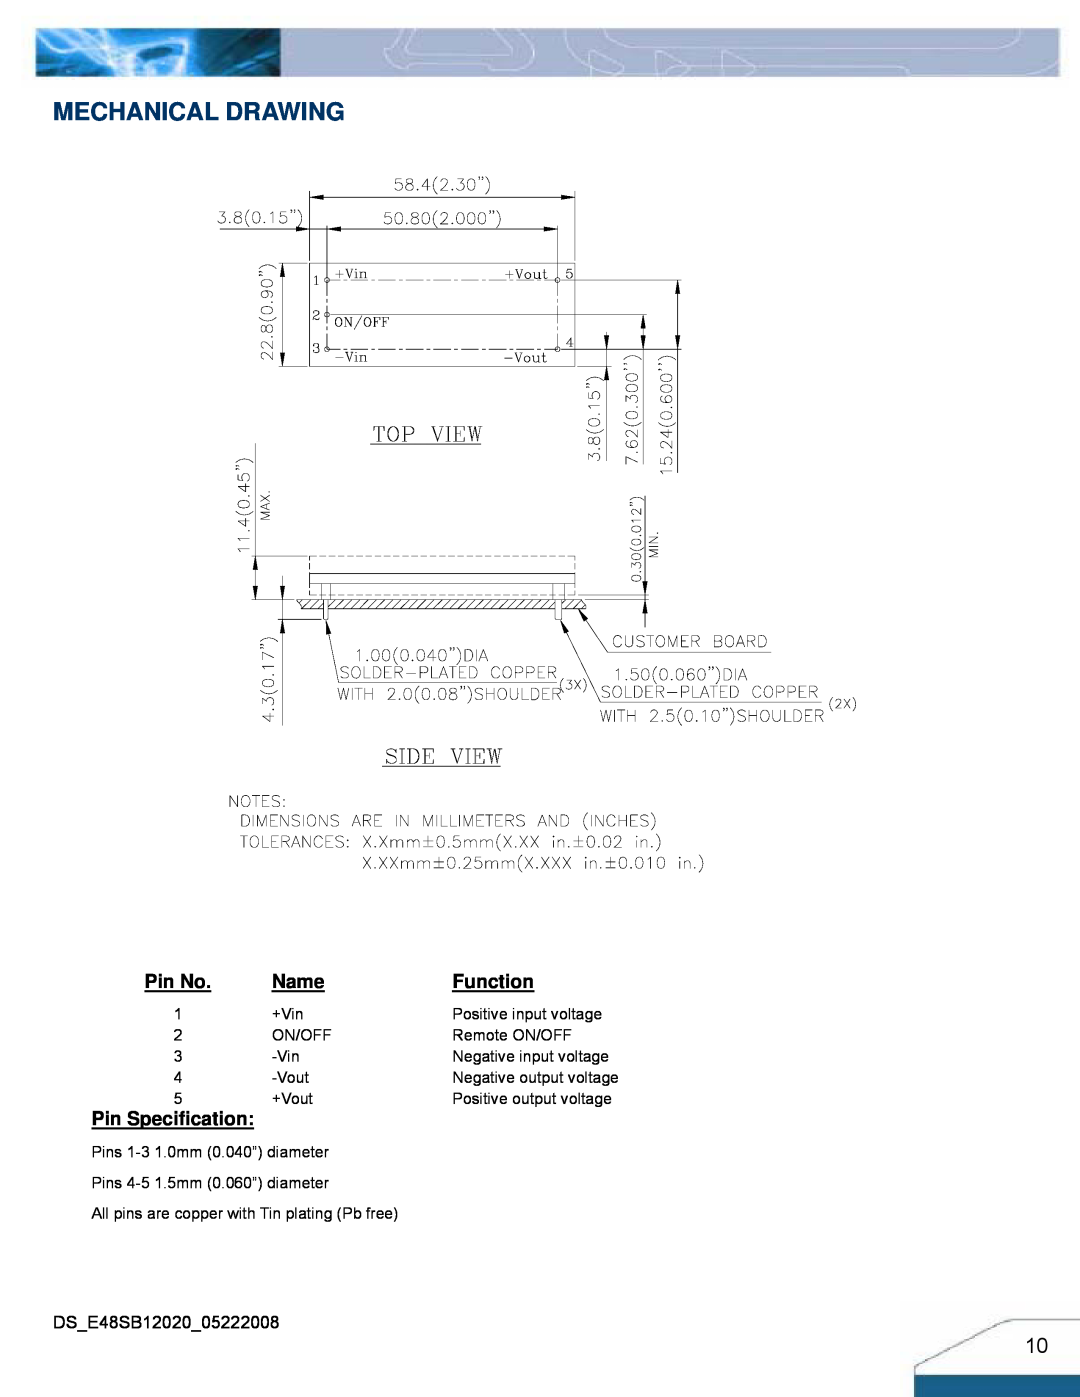 Delta Electronics Series 240W manual Mechanical Drawing, Pin No, Name, Function, Pin Specification 